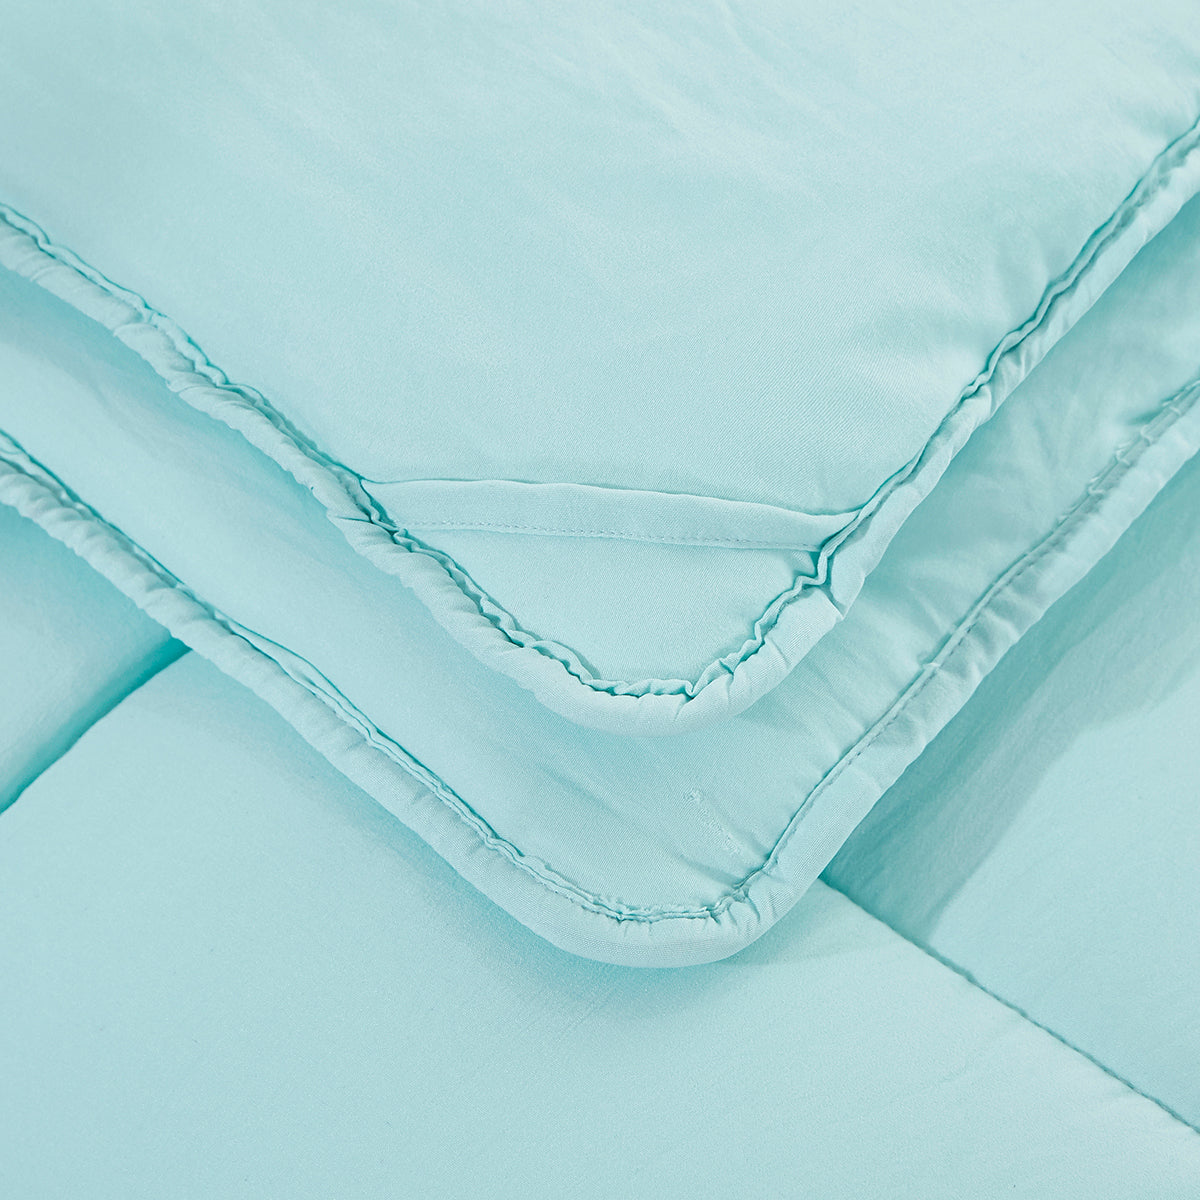 ALTERNATIVE DOWN 3PC COMFORTER. PERFECT FOR ANY SEASON. ULTRA SOFT MICROFIBER COVER. CYAN